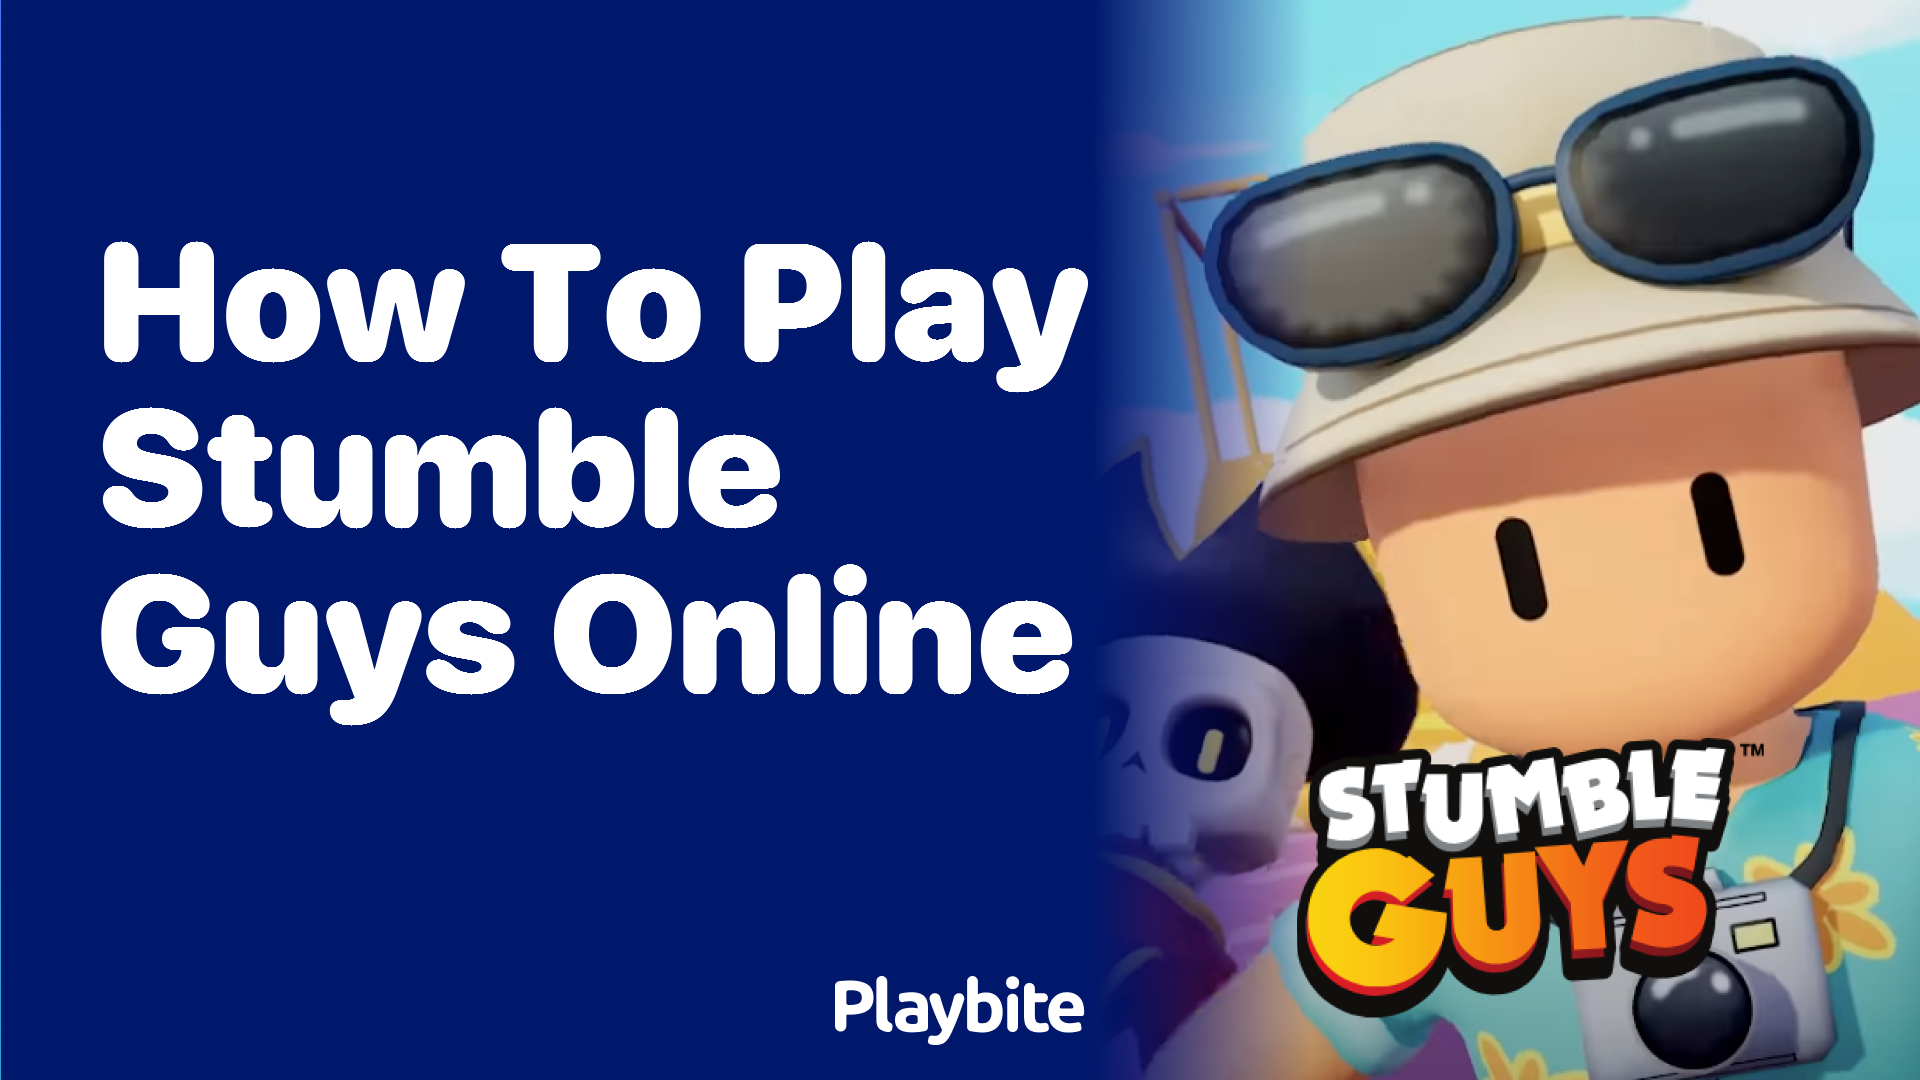 How to Play Stumble Guys Online: A Quick Guide